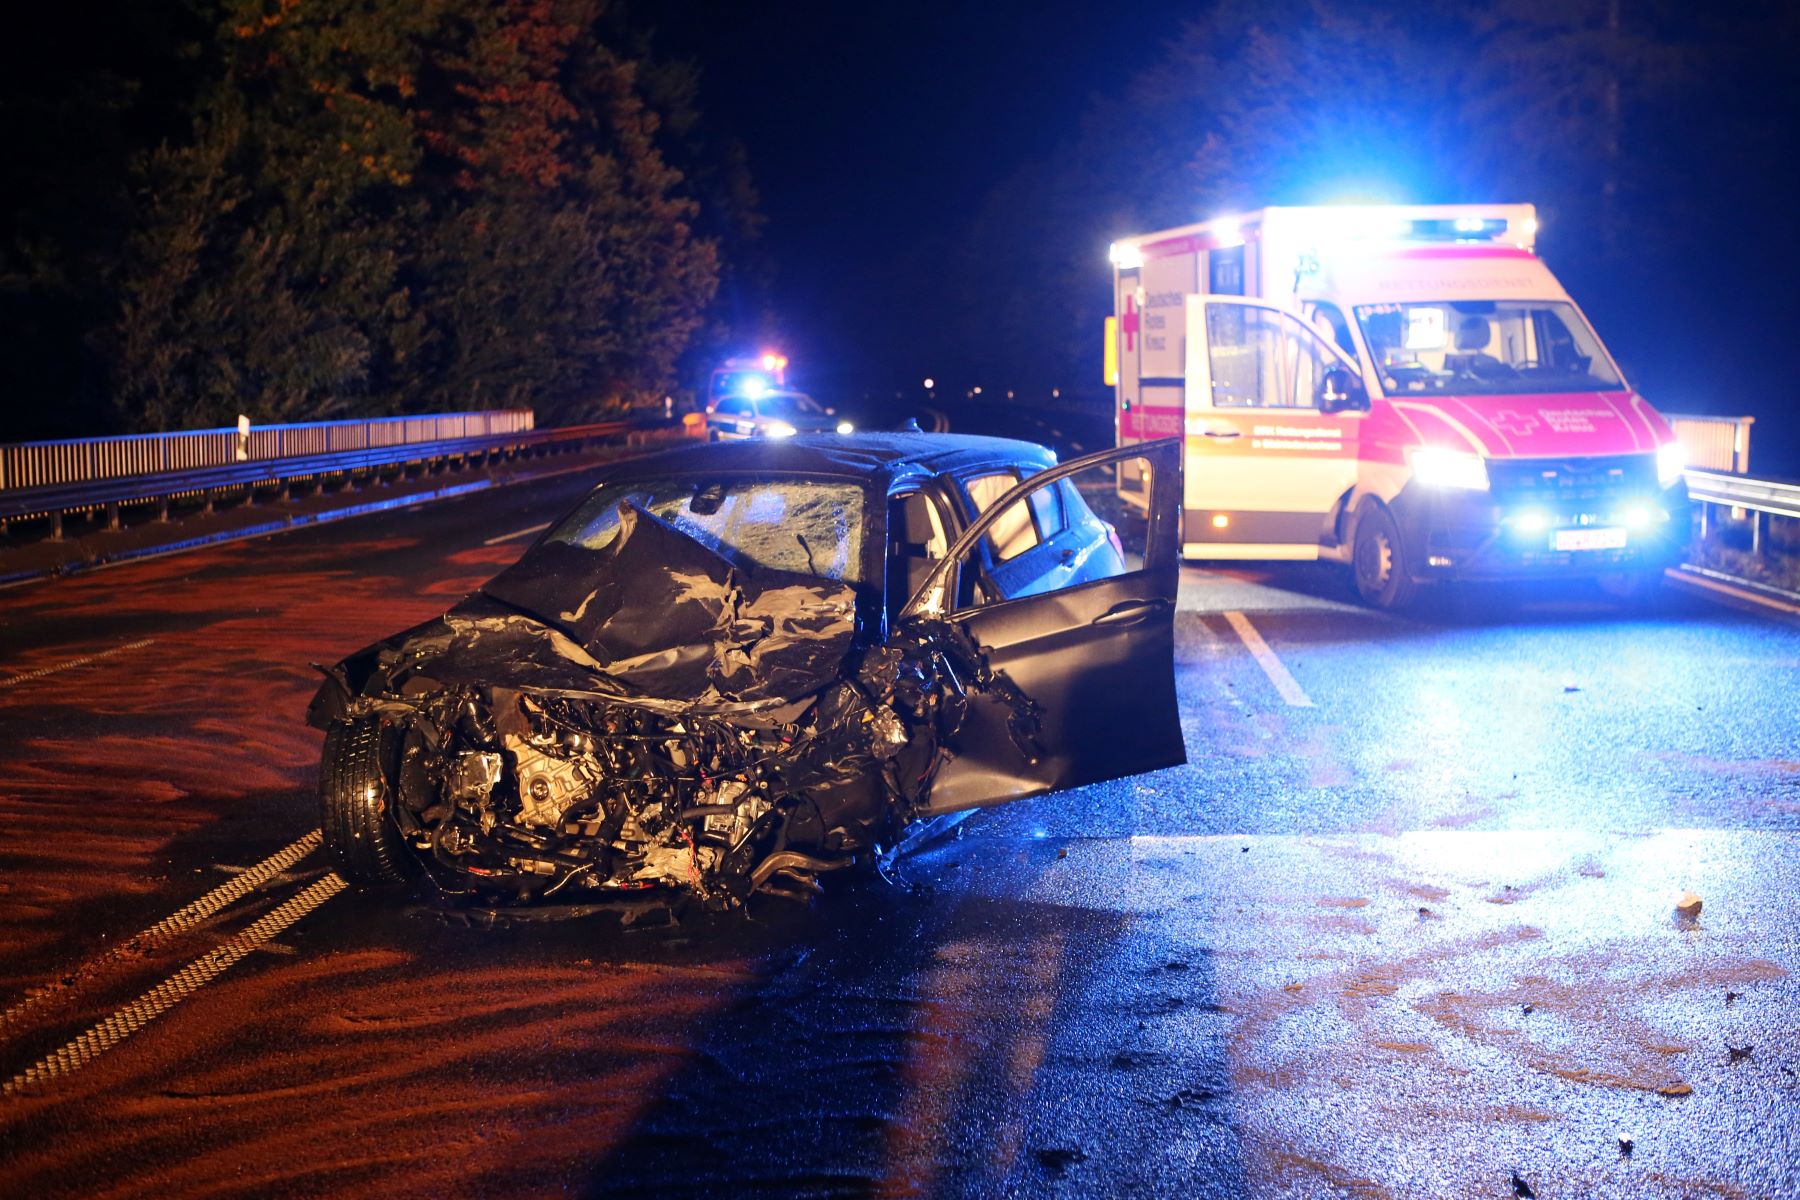 The aftermath of a wrecked car in a fatal accident scene in Lower Saxony, Ebergötzen